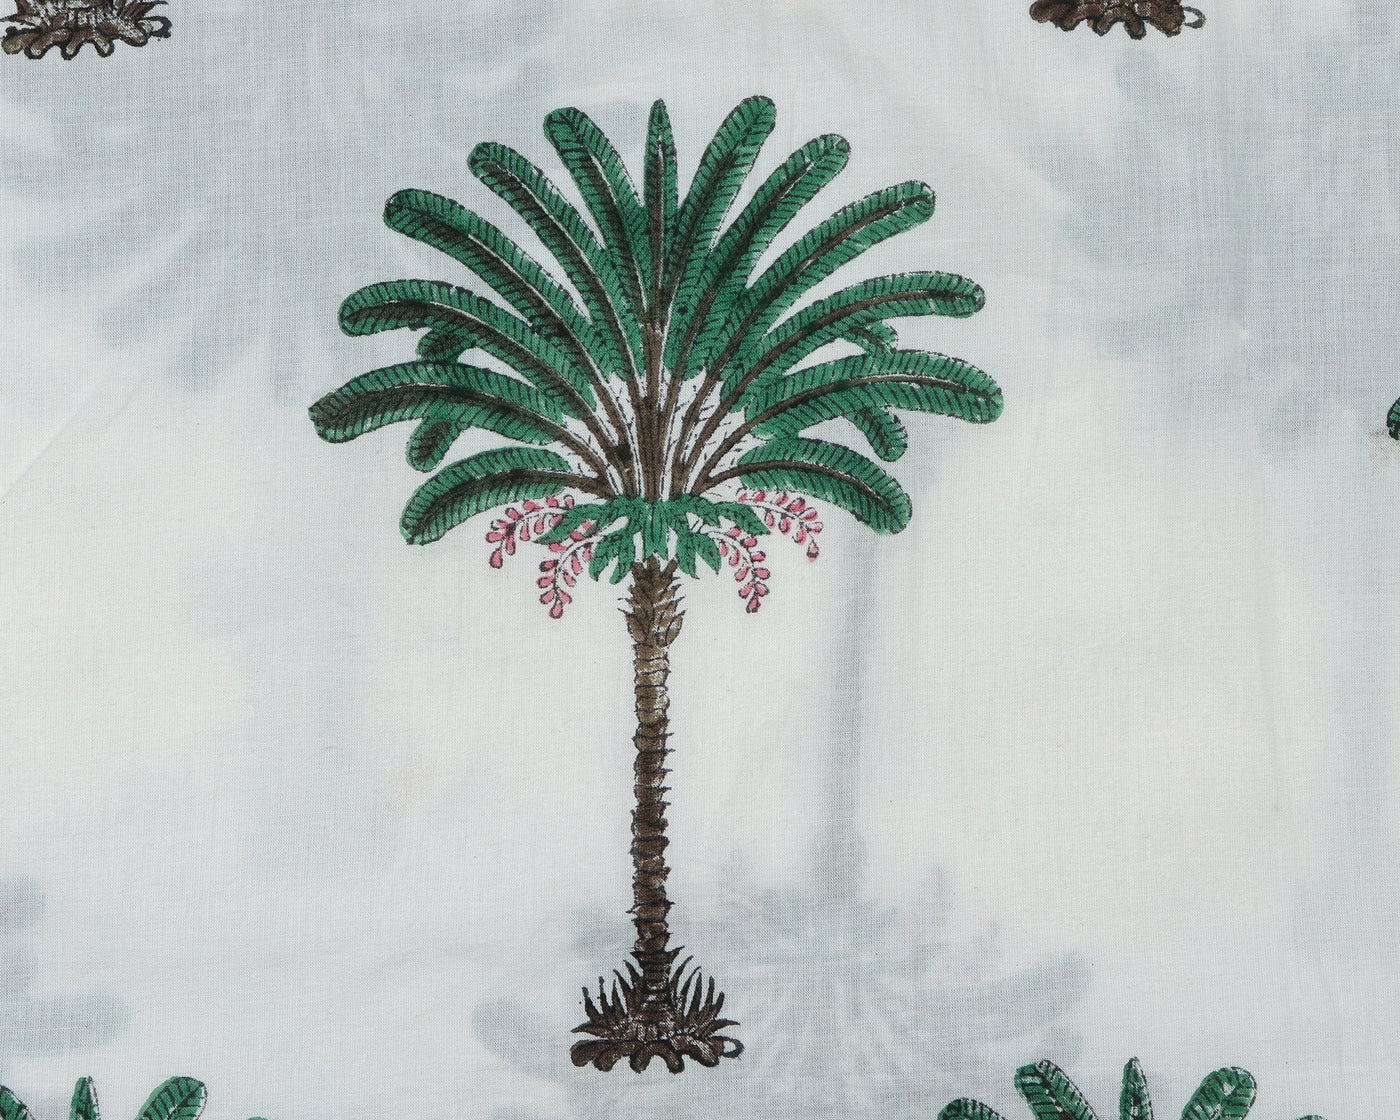 Fabricrush Amazon Green, Brown and Red Indian Palm Tree Hand Block Printed 100% Pure Cotton Cloth, Fabric by the yard, Kimono Skirt Curtains Tablecloth